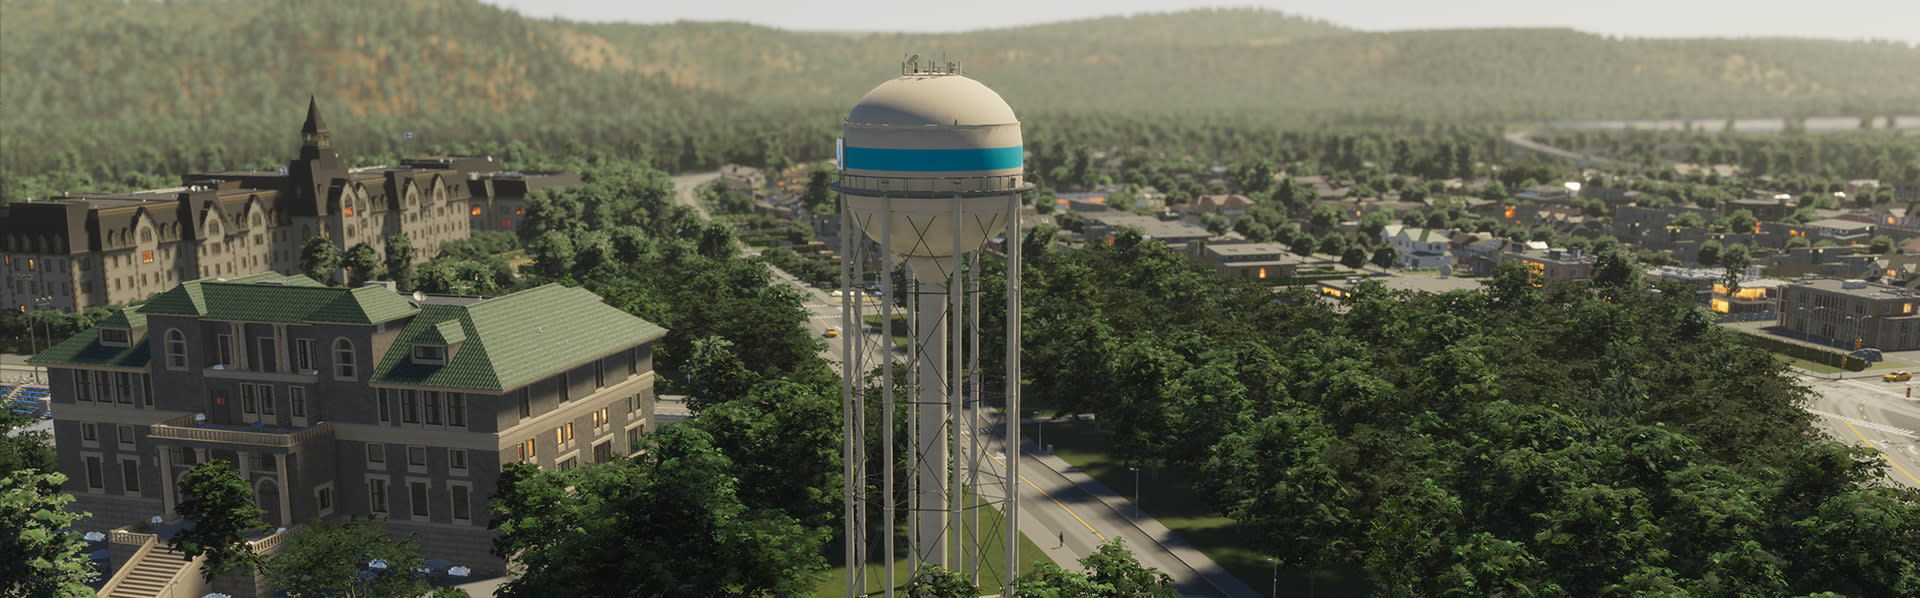 cities-skylines-ii-feature-6-21 Water tower